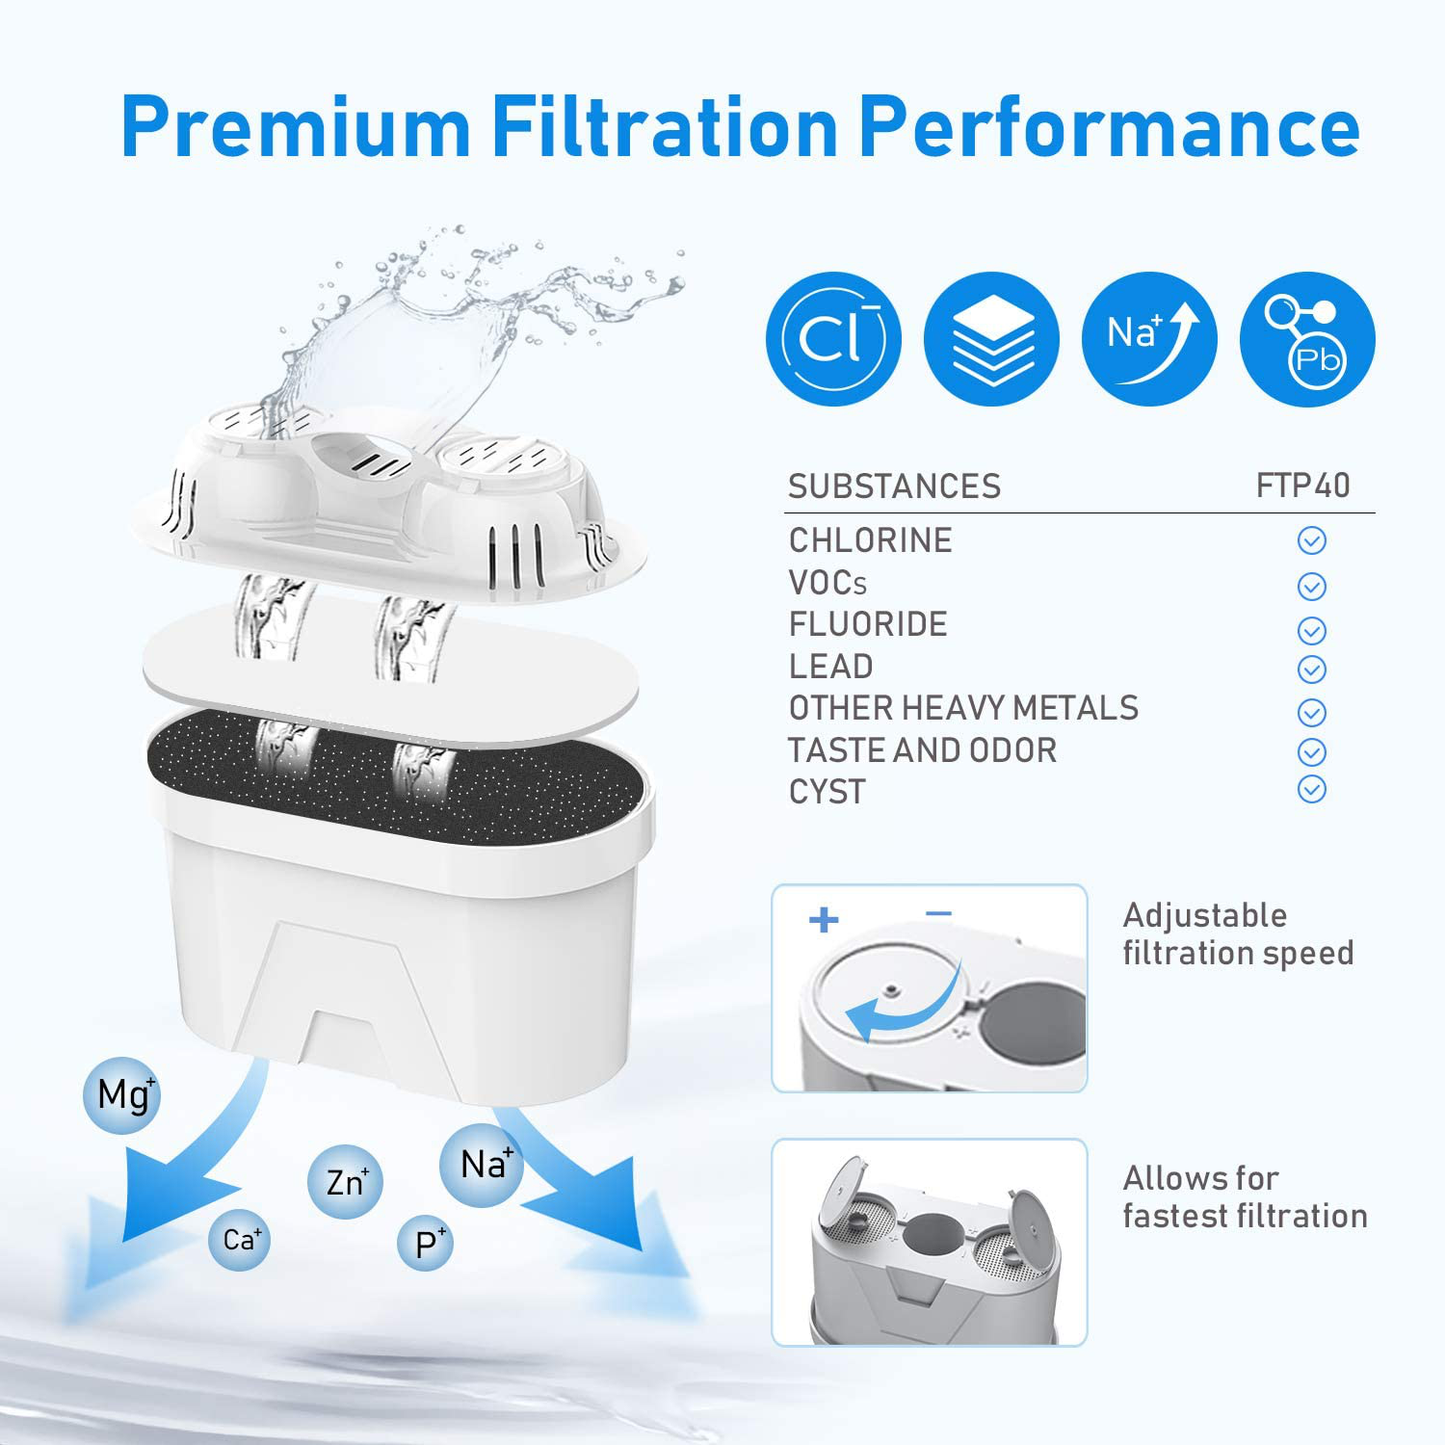 FRIZZLIFE Replacement Water Filter Cartridge Set for FP40 Water Filter Pitcher and T900 Countertop Water Filter(2 Pack) - FPT01